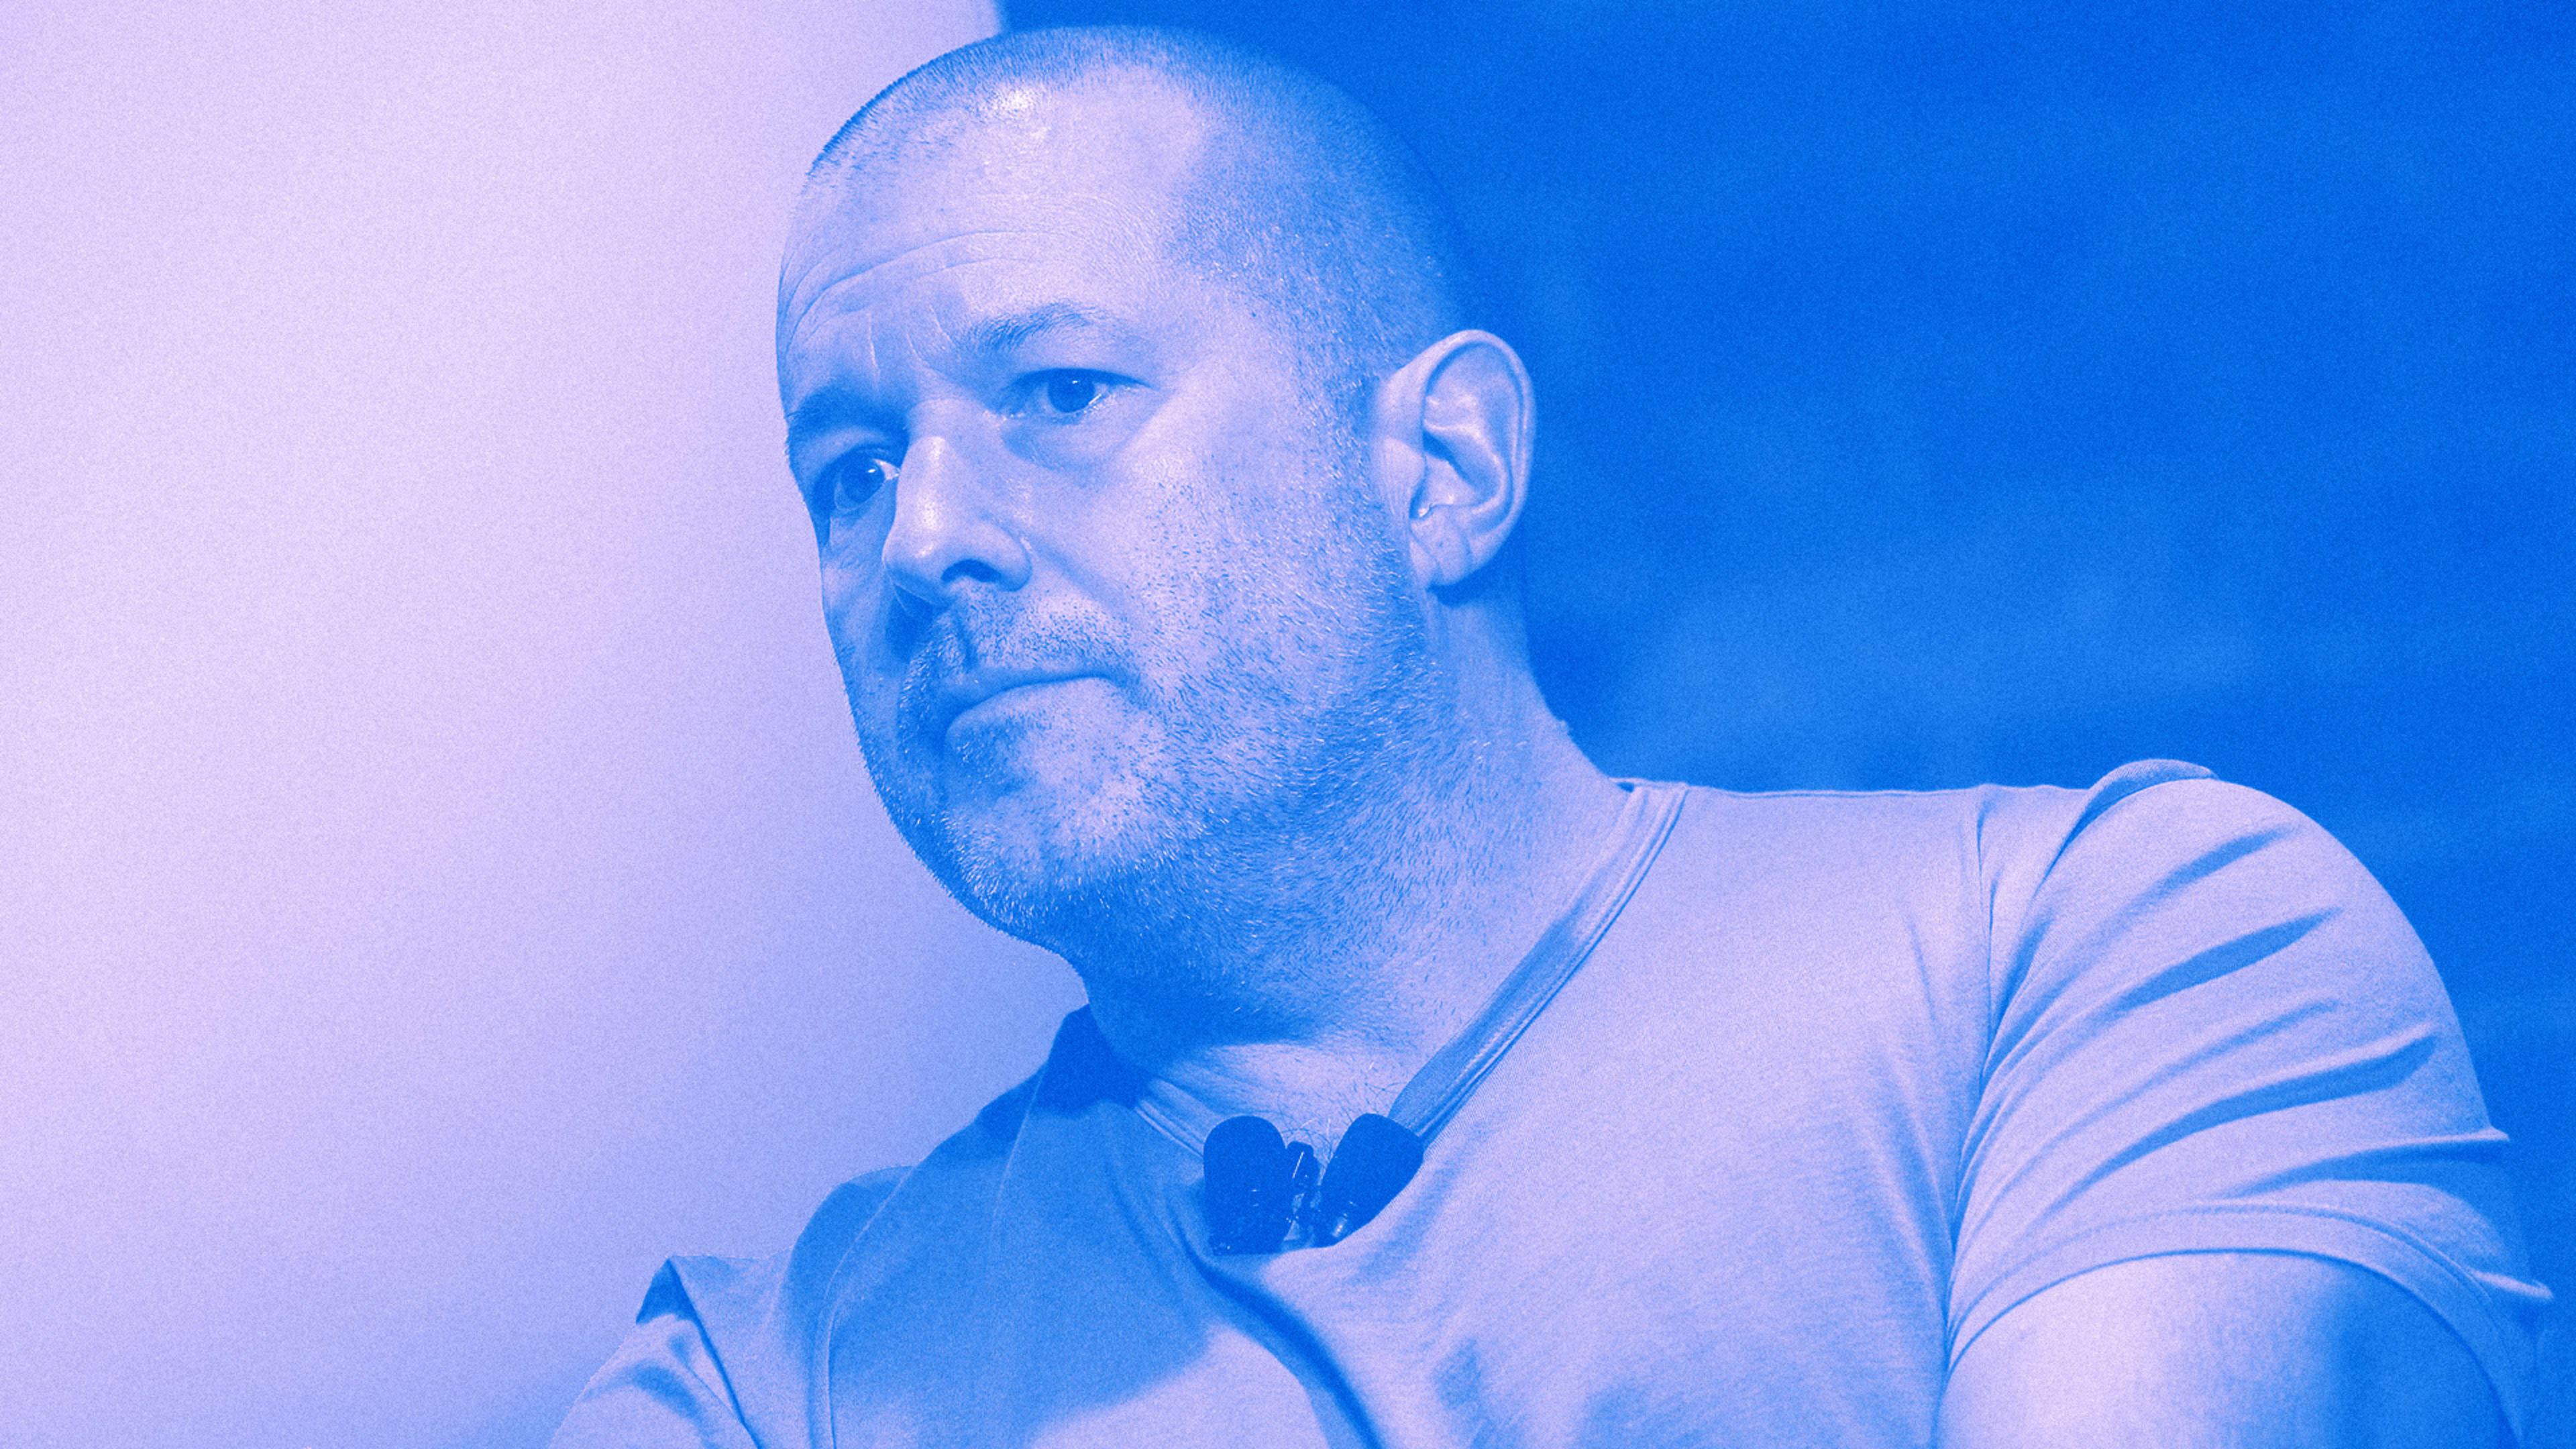 Jony Ive Dishes On Apple Rumors And His Design Team In Rare Interview